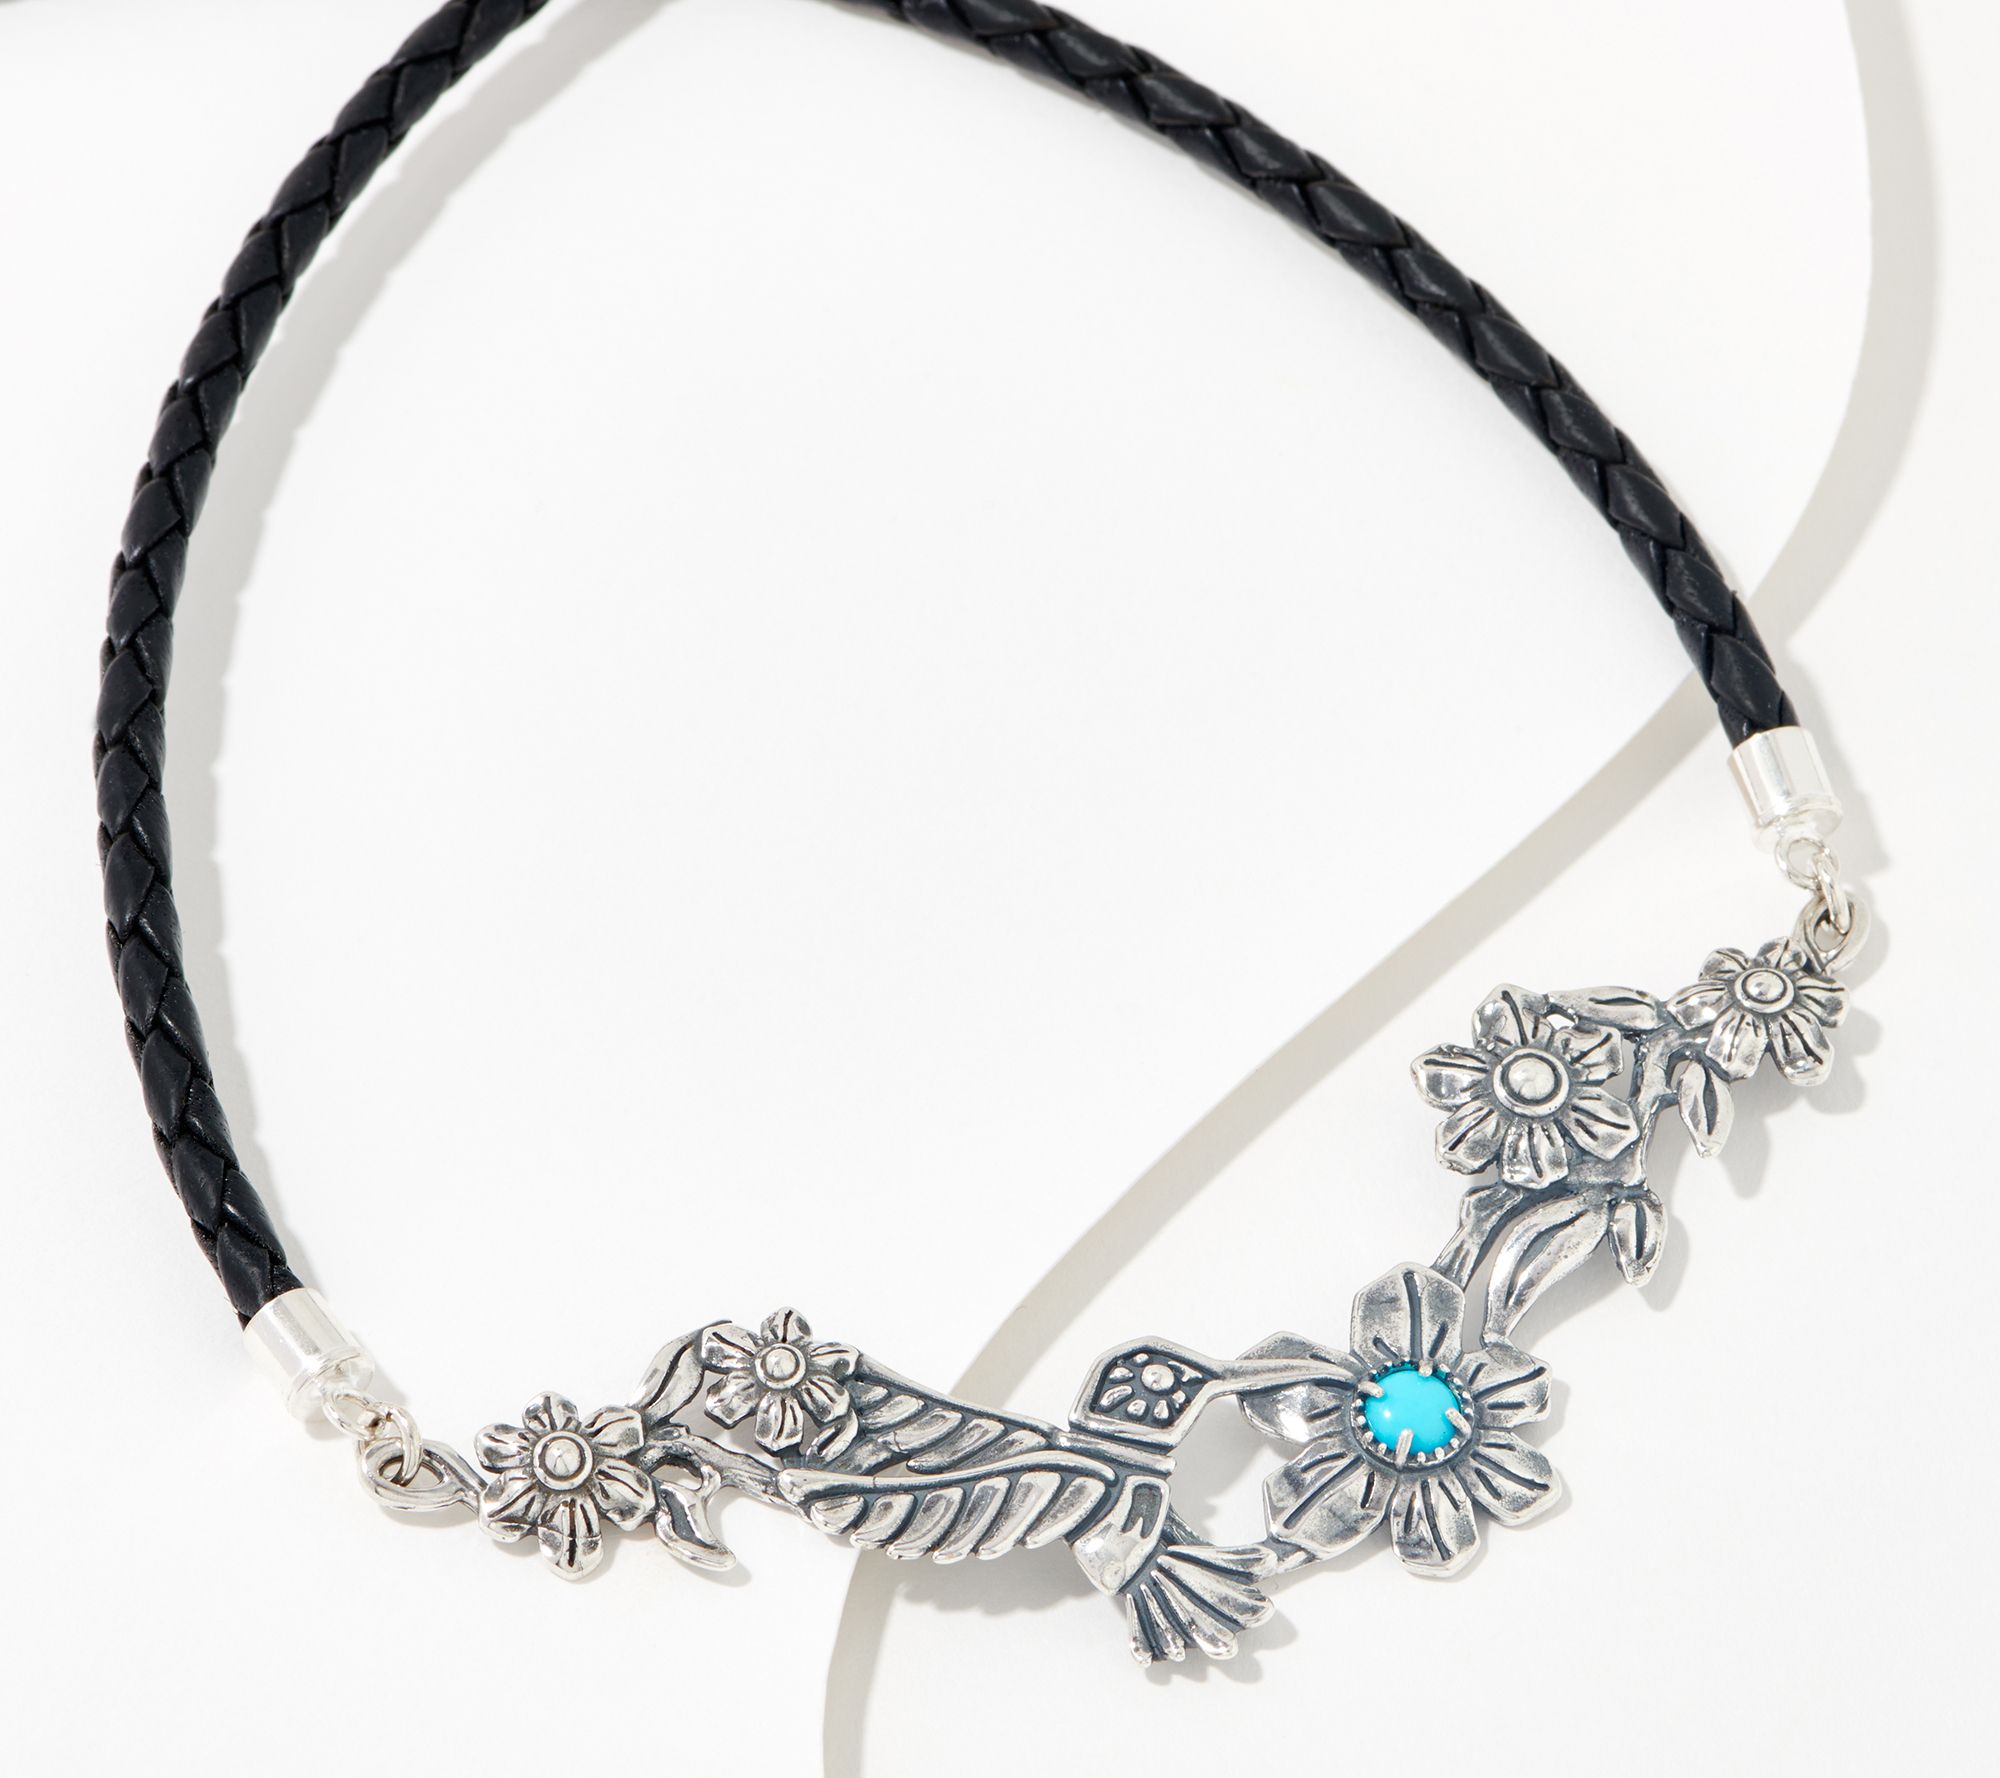 leahter necklace made of braided leather and 925 sterling silver choose  your length up to 60 cm * Jewelry Shop